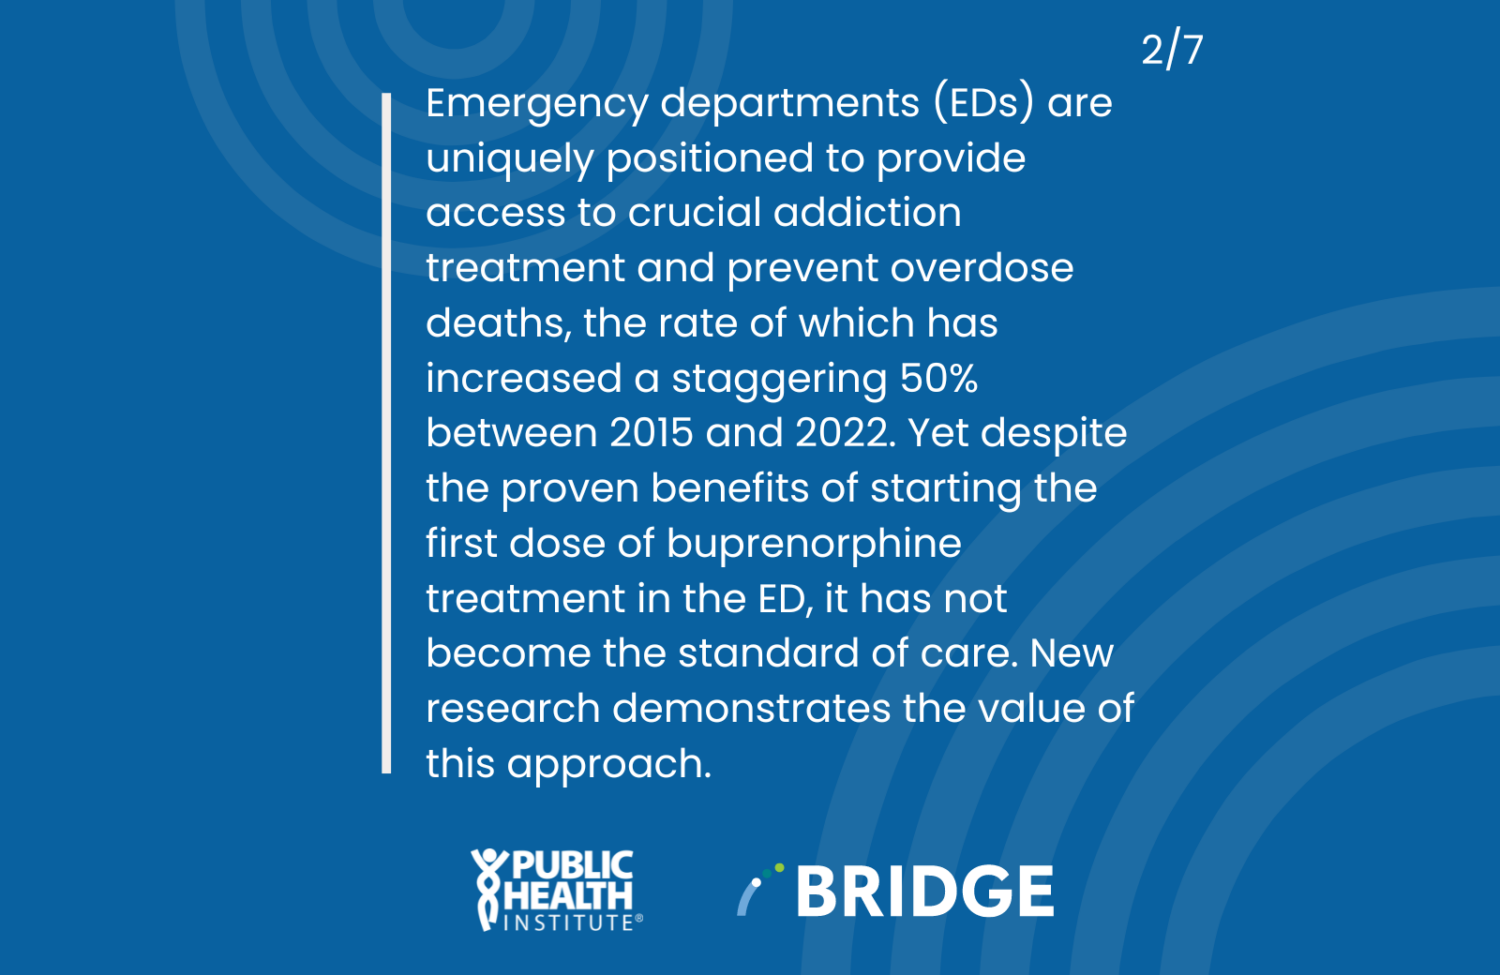 Emergency departments (EDs) are uniquely positioned to provide access to crucial addiction treatment and prevent overdose deaths, the rate of which has increased a staggering 50% between 2015 and 2022. Yet despite the proven benefits of starting the first dose of buprenorphine treatment in the ED, it has not become the standard of care. New research demonstrates the value of this approach.